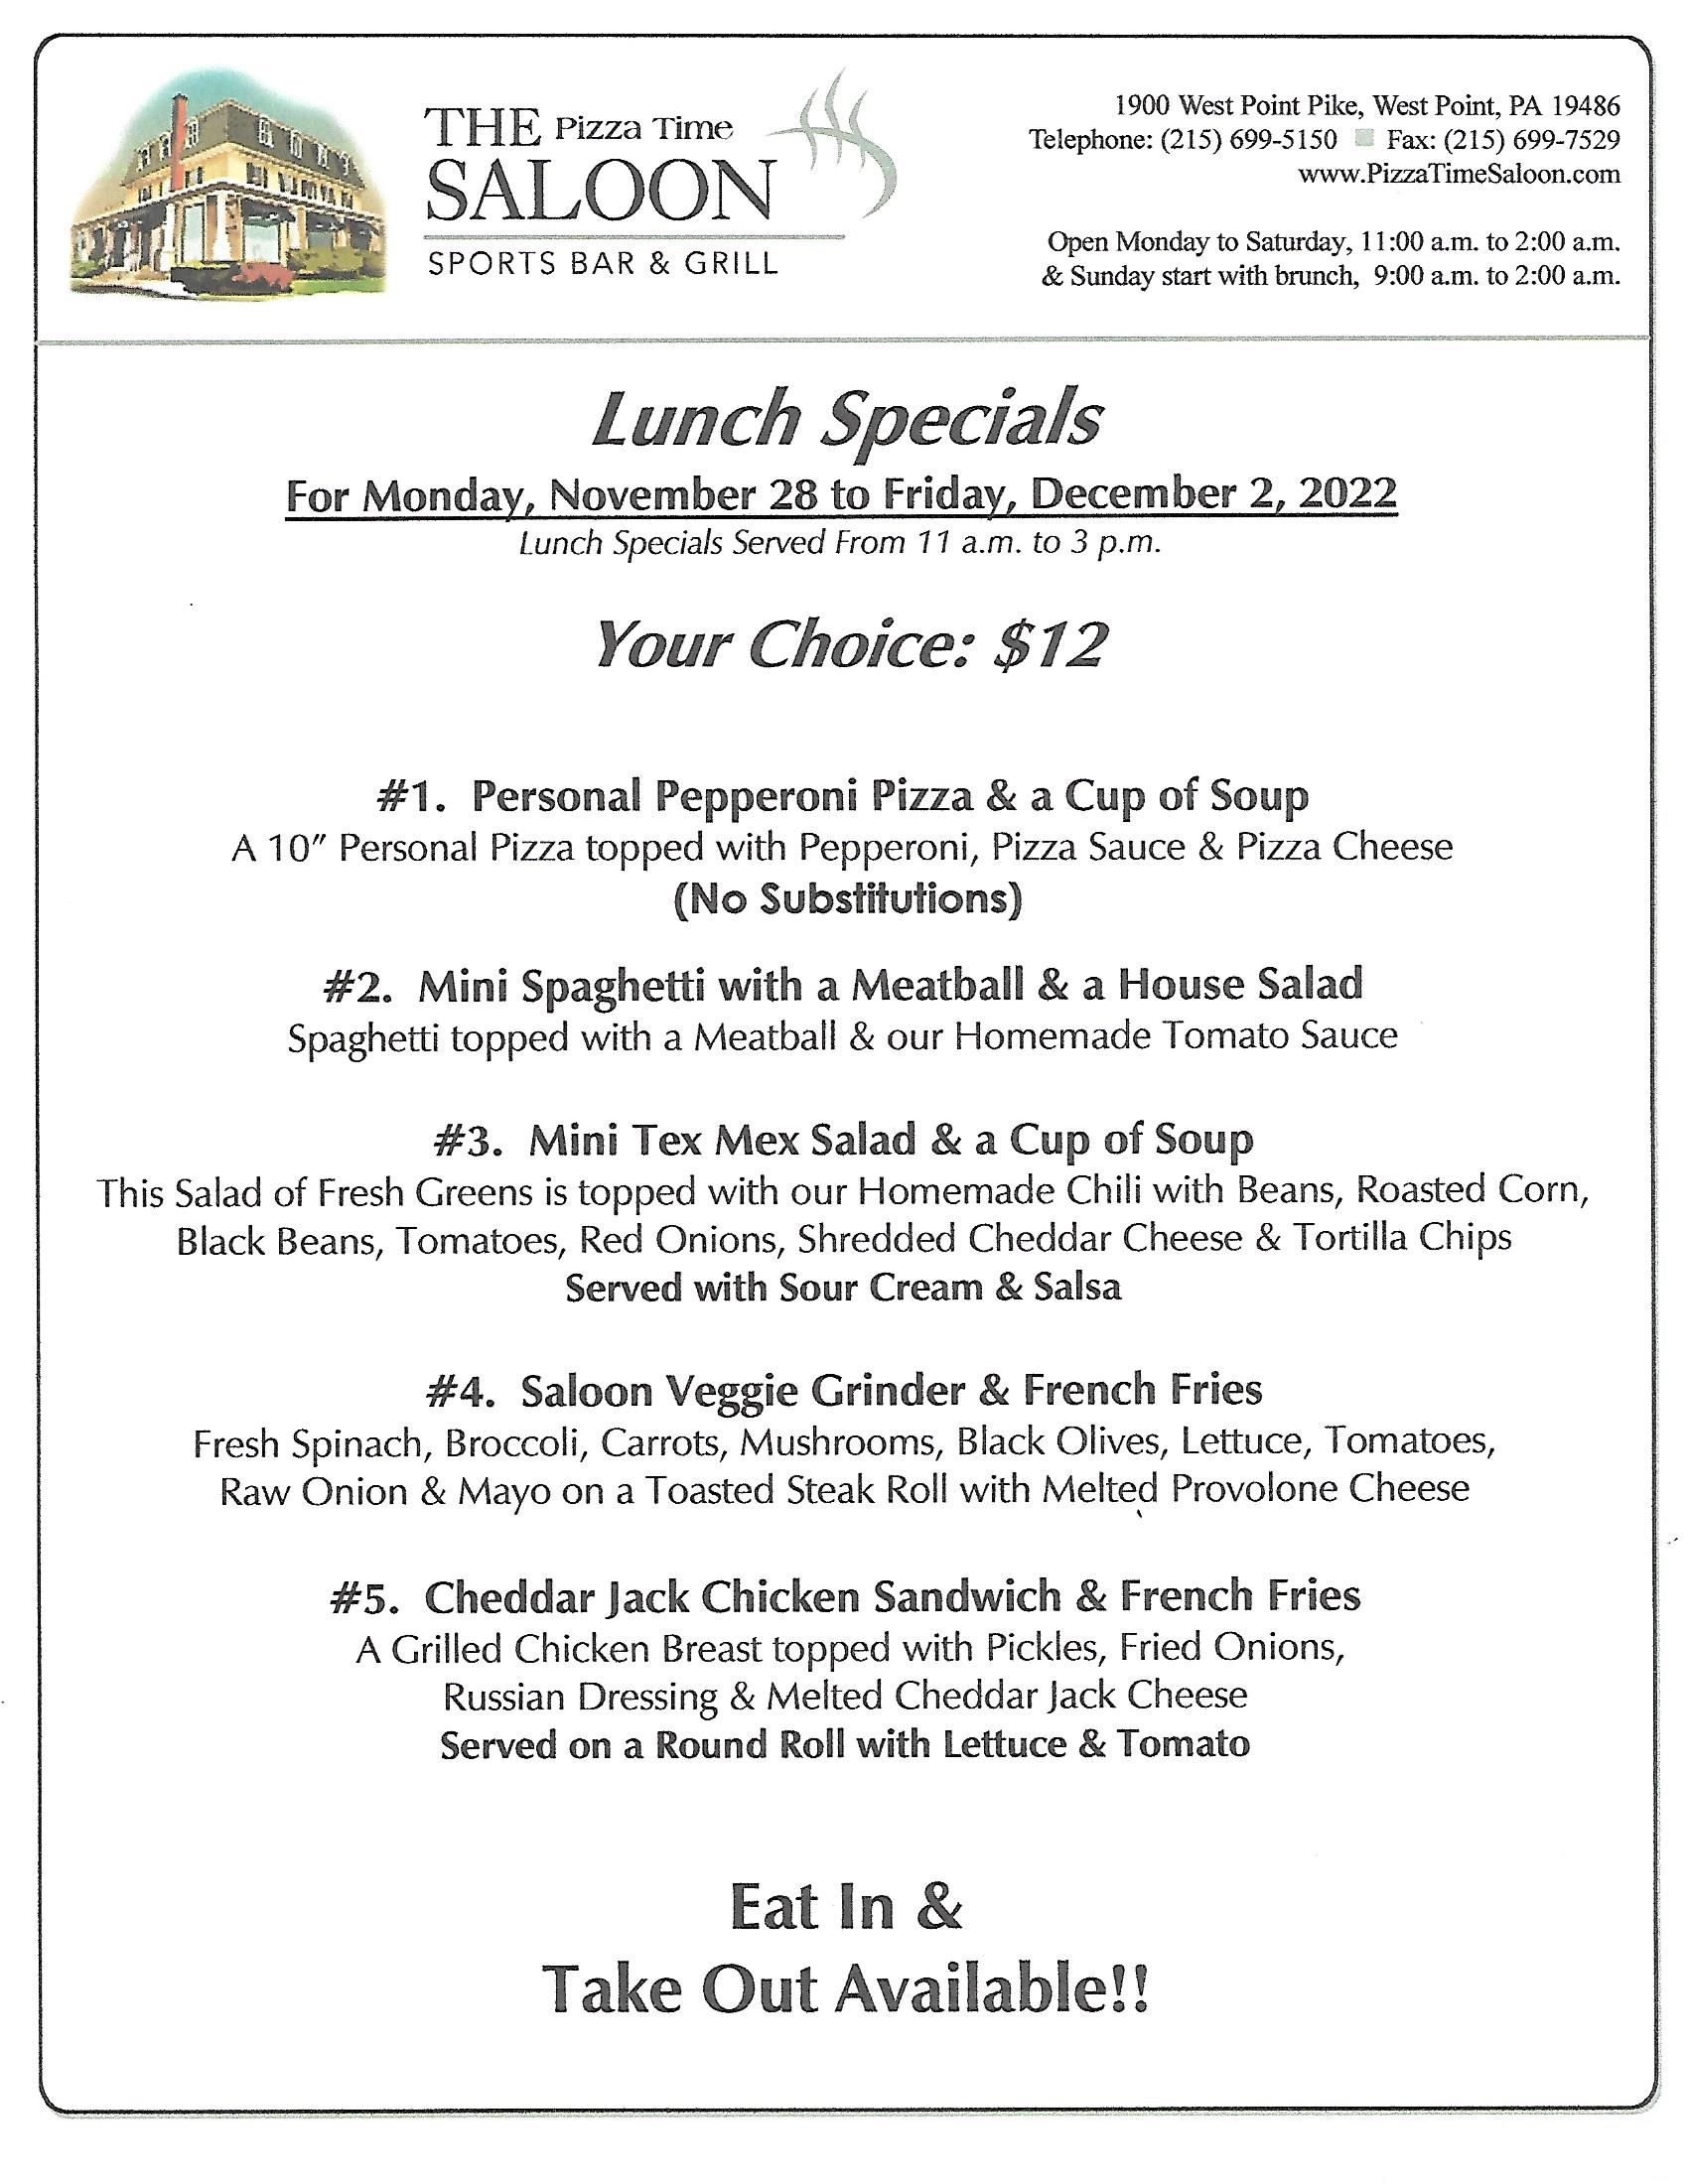 PTS lunch Specials 11-28-22